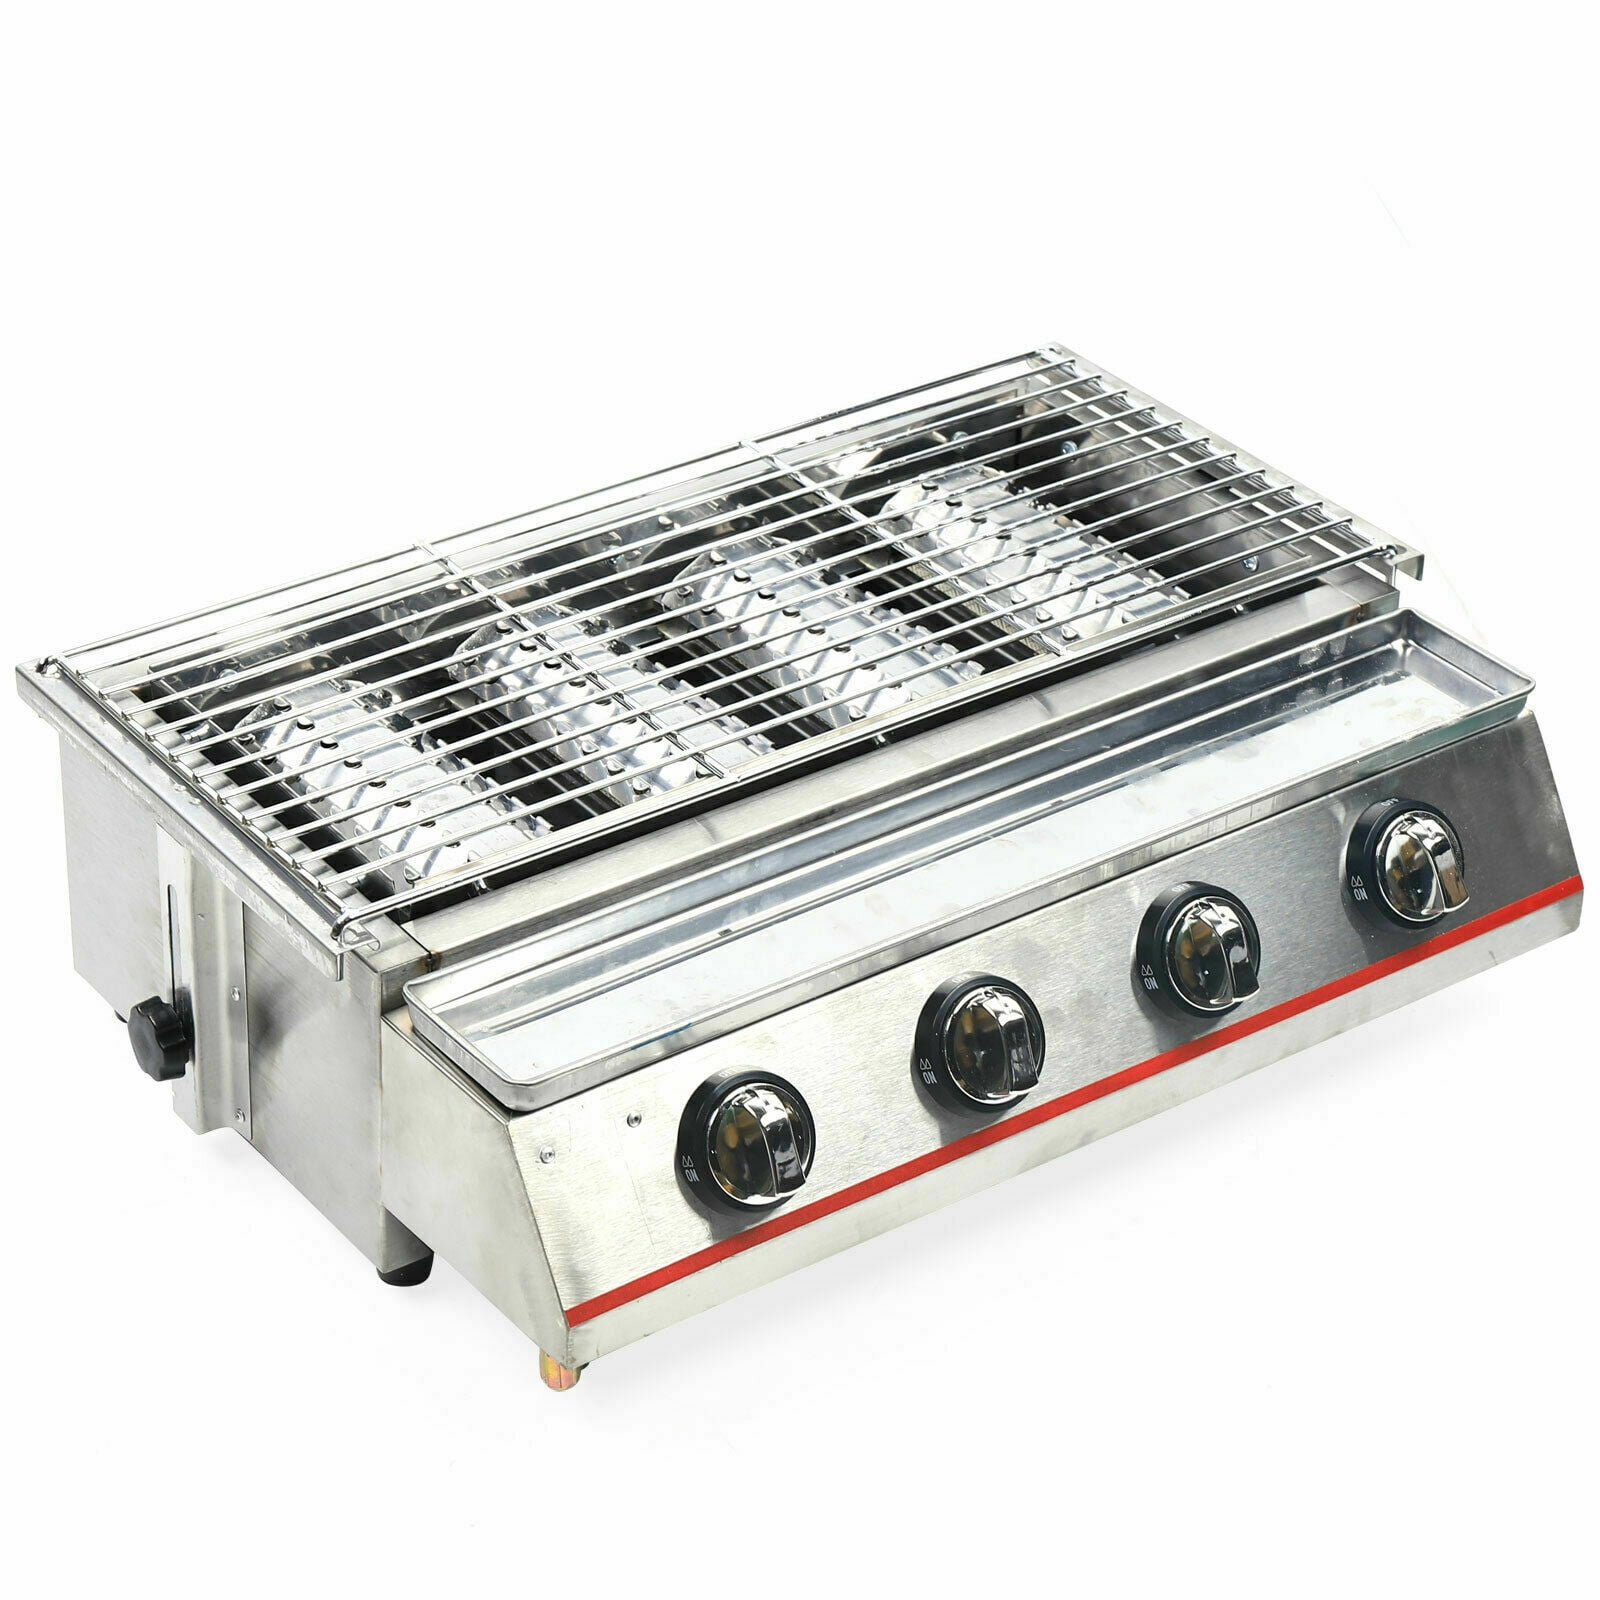 LPG Grill Smokeless Barbecue Grill Outdoor BBQ Grill 3 Burners Barbecue  Tools